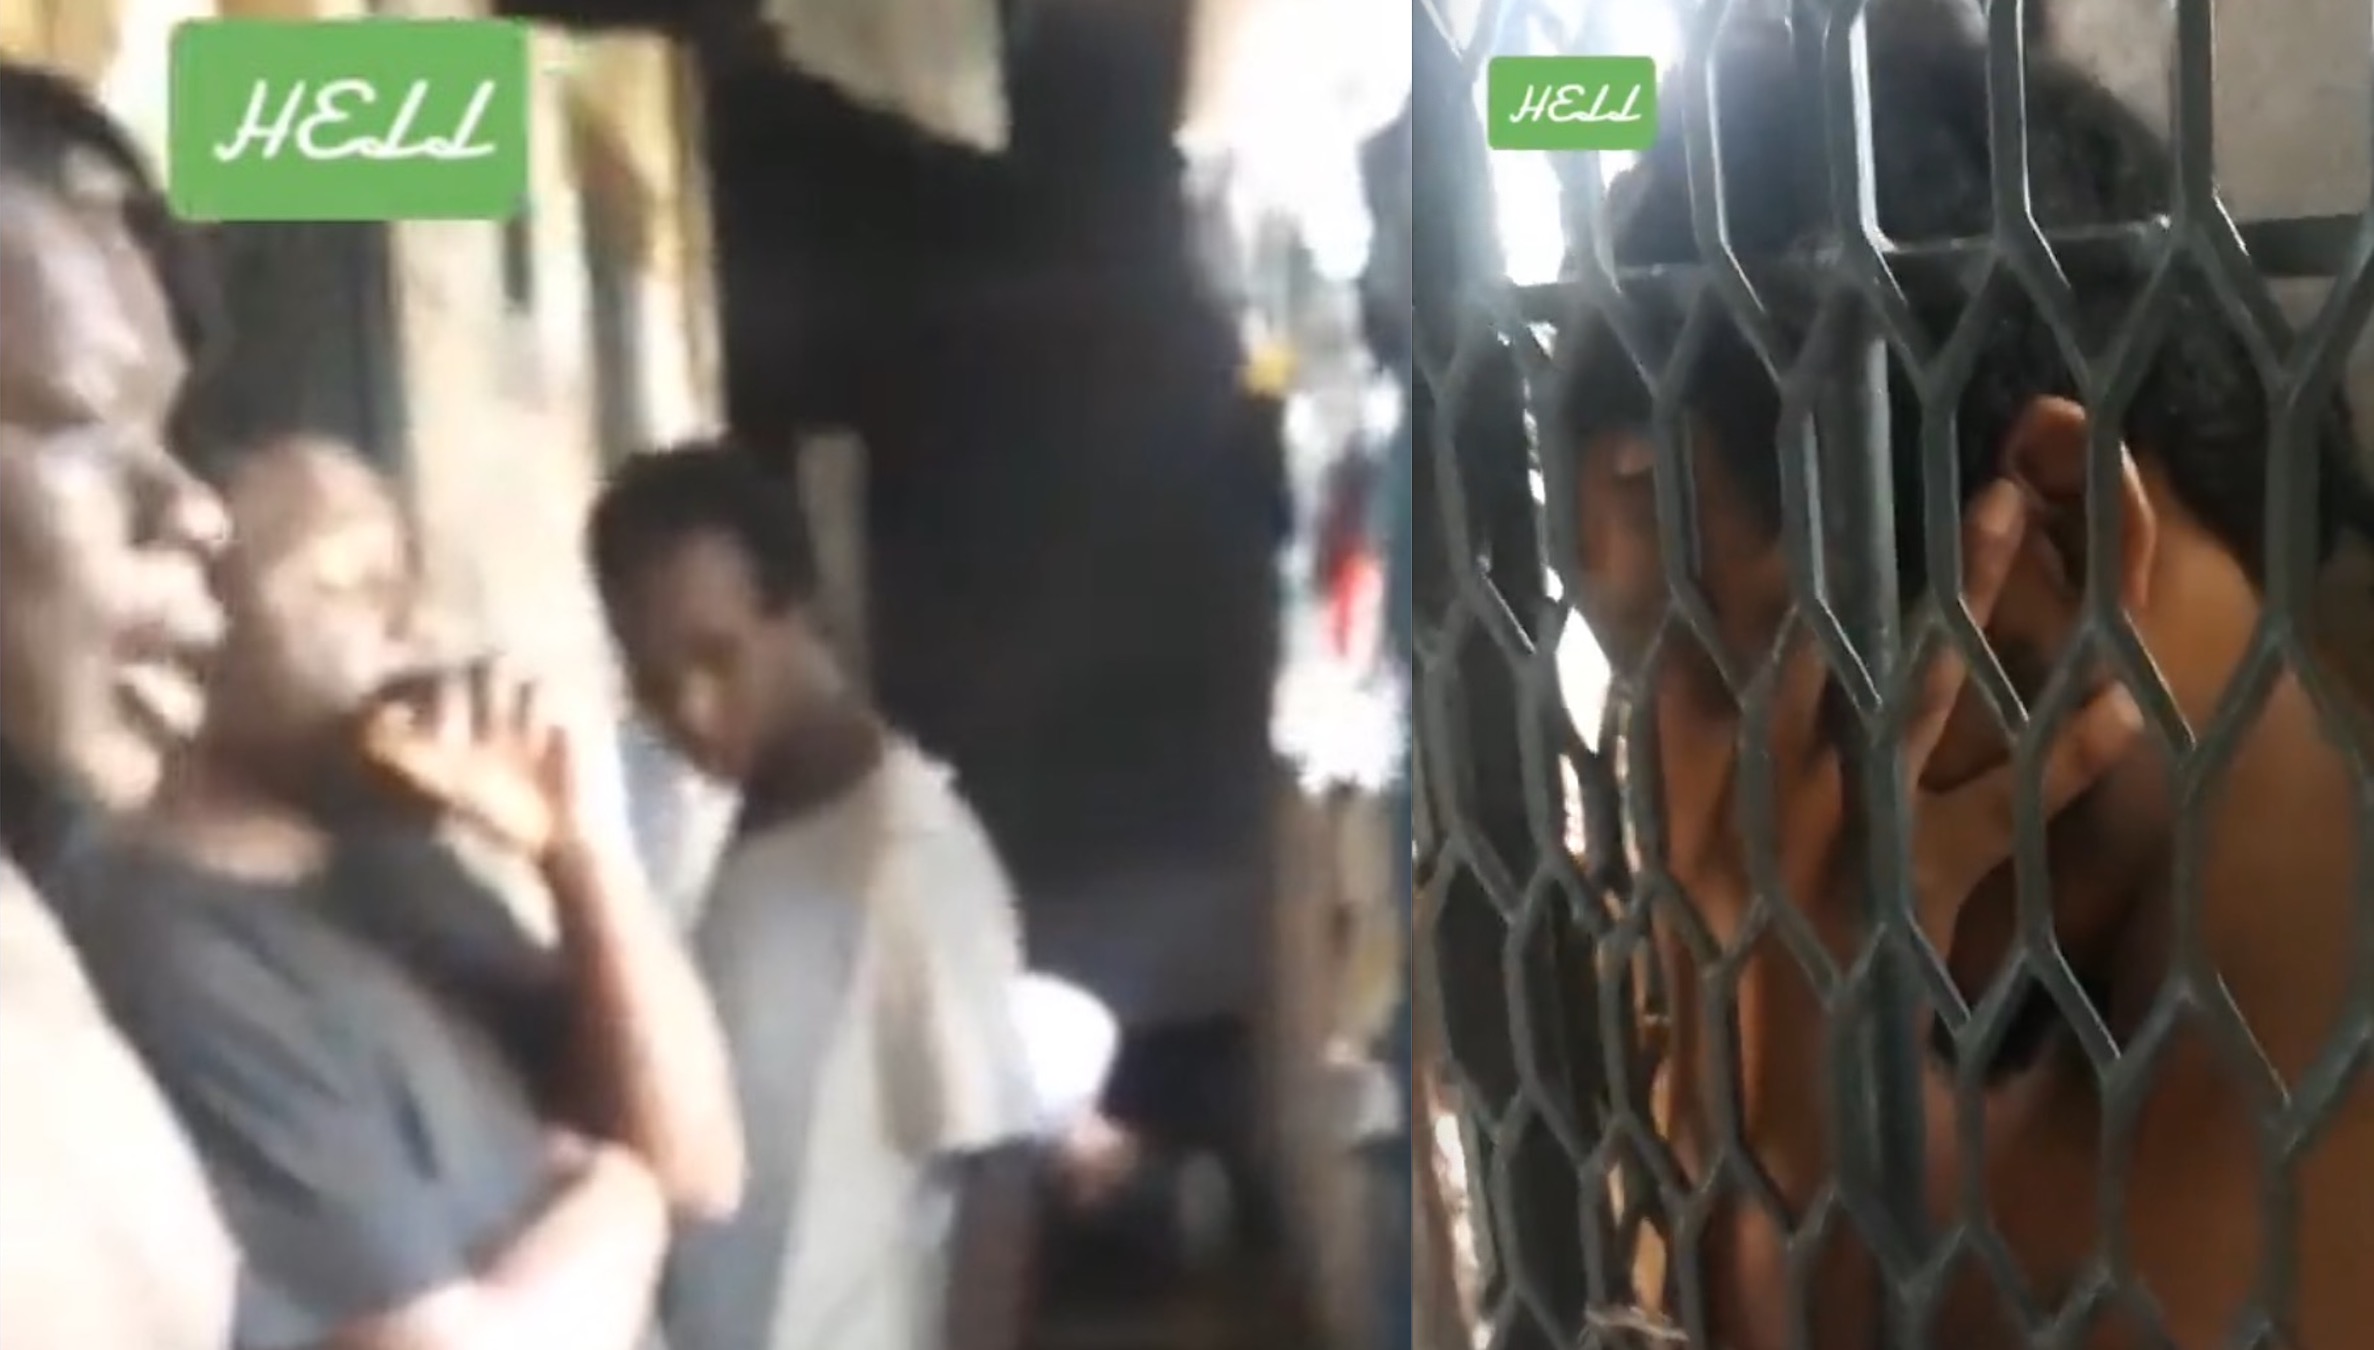 Male Putted Behind Grill Cage as Punishment in Jamaican Jail - Watch Video